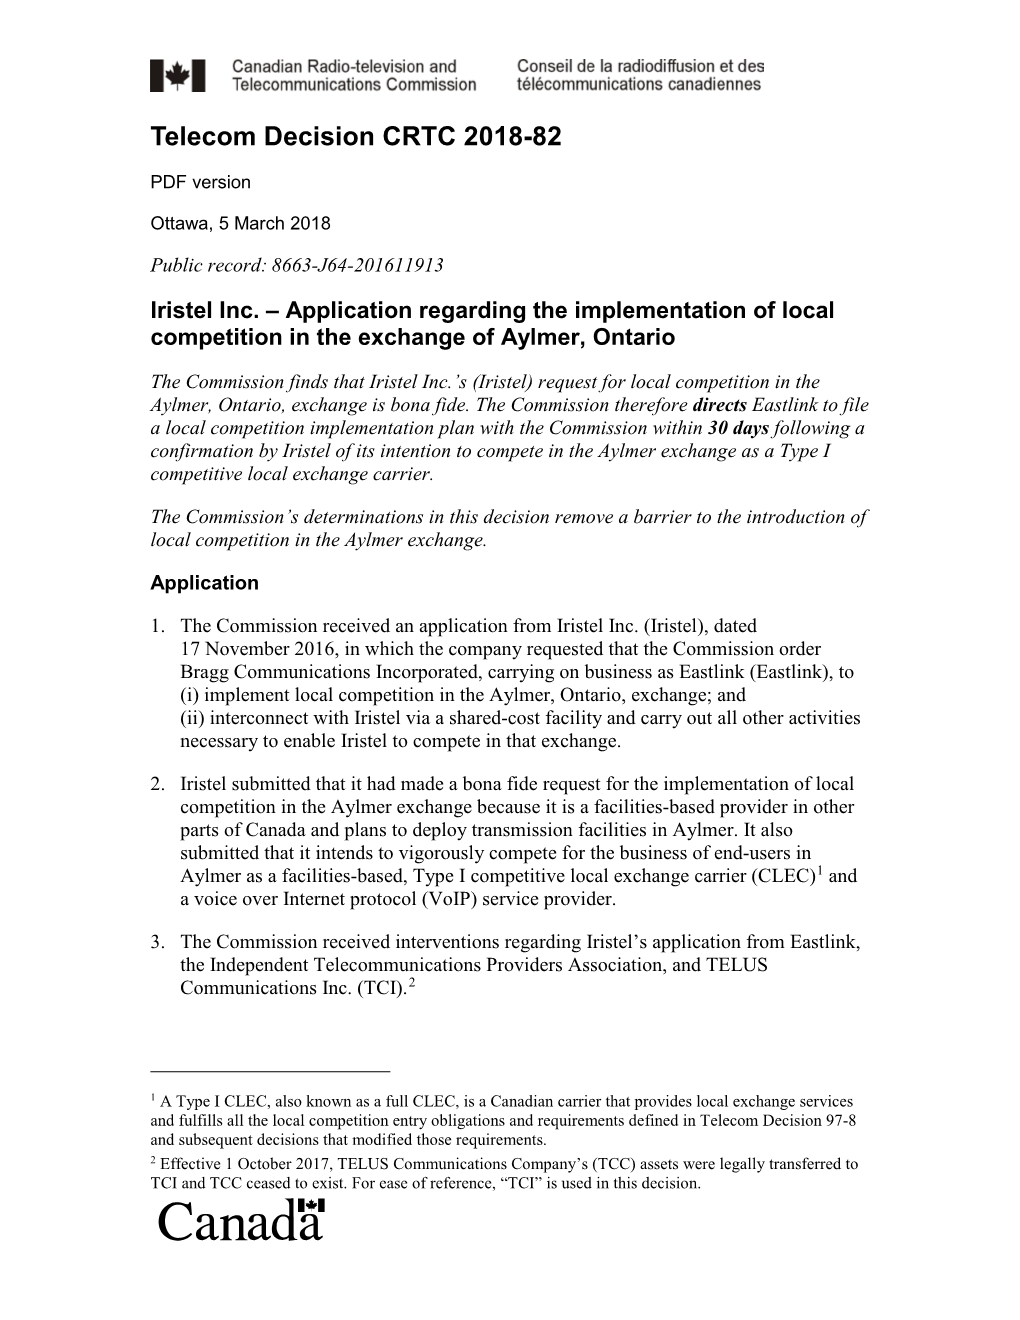 Iristel Inc. – Application Regarding the Implementation of Local Competition in the Exchange of Aylmer, Ontario